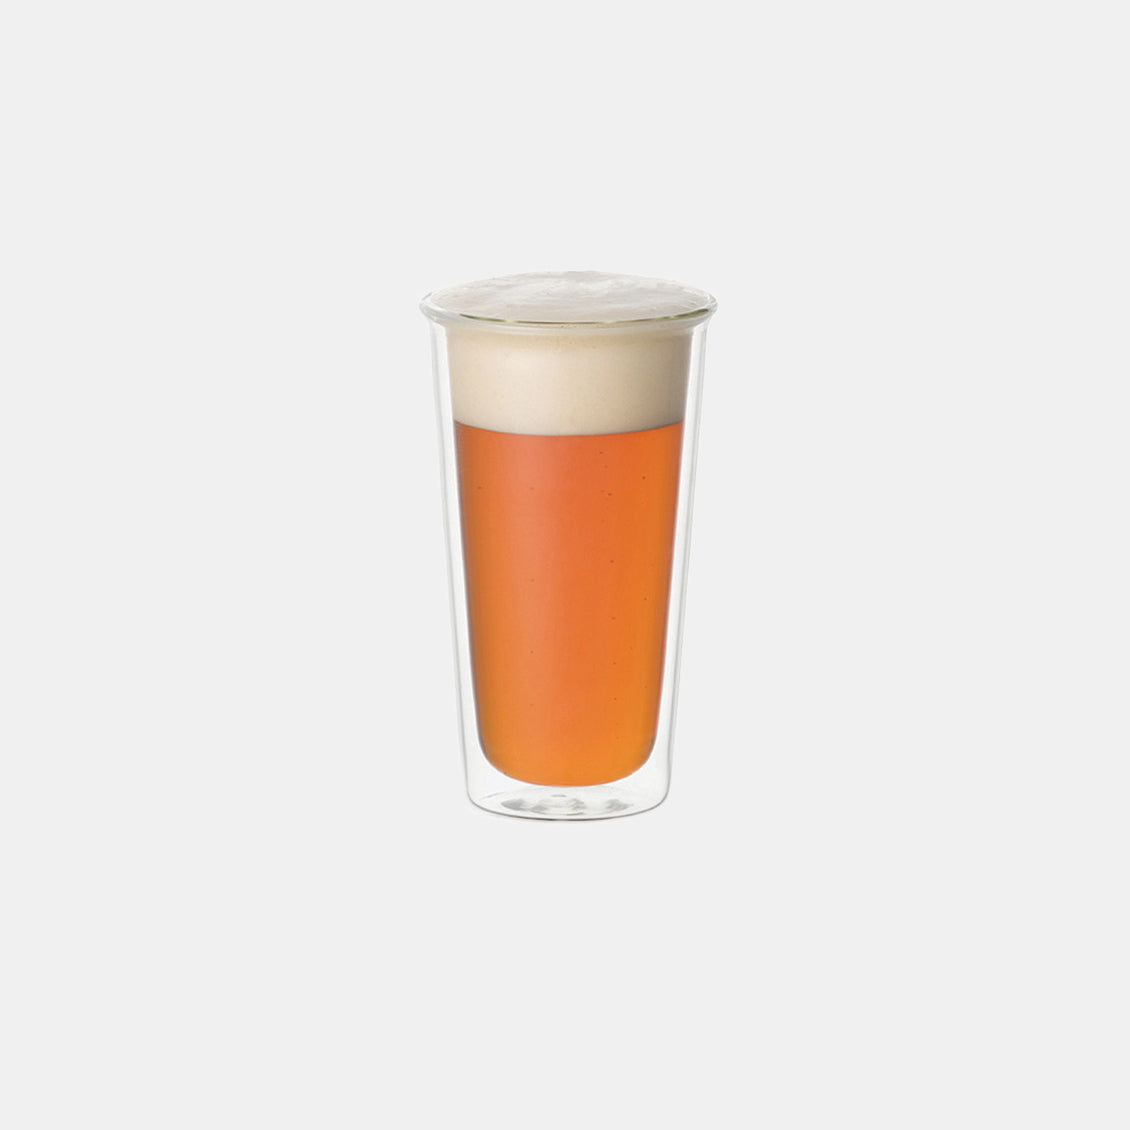 CAST Double Wall Beer Glass - 340ml